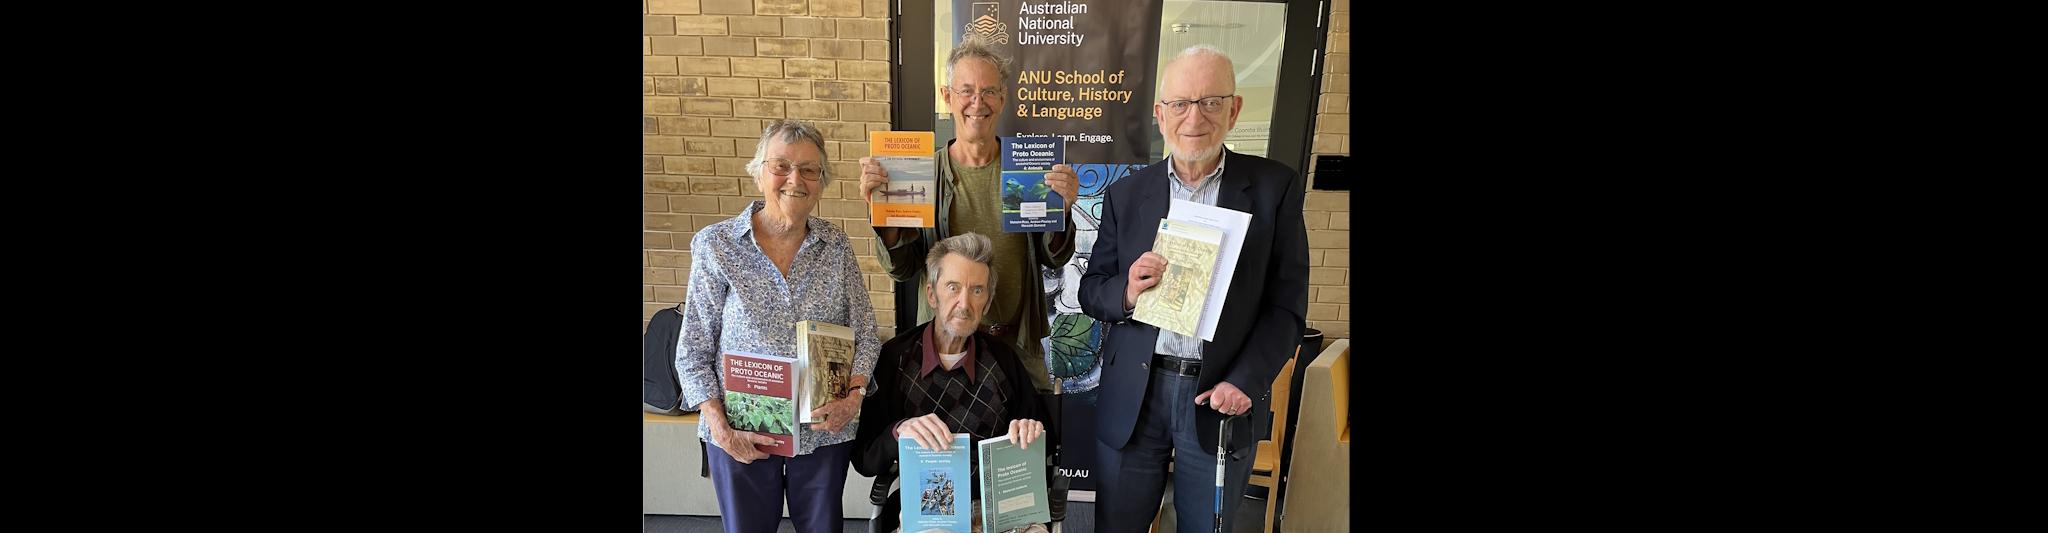 Meredith Osmond, Nick Evans, Malcolm Ross and Andrew Pawley holding copies of the volumes